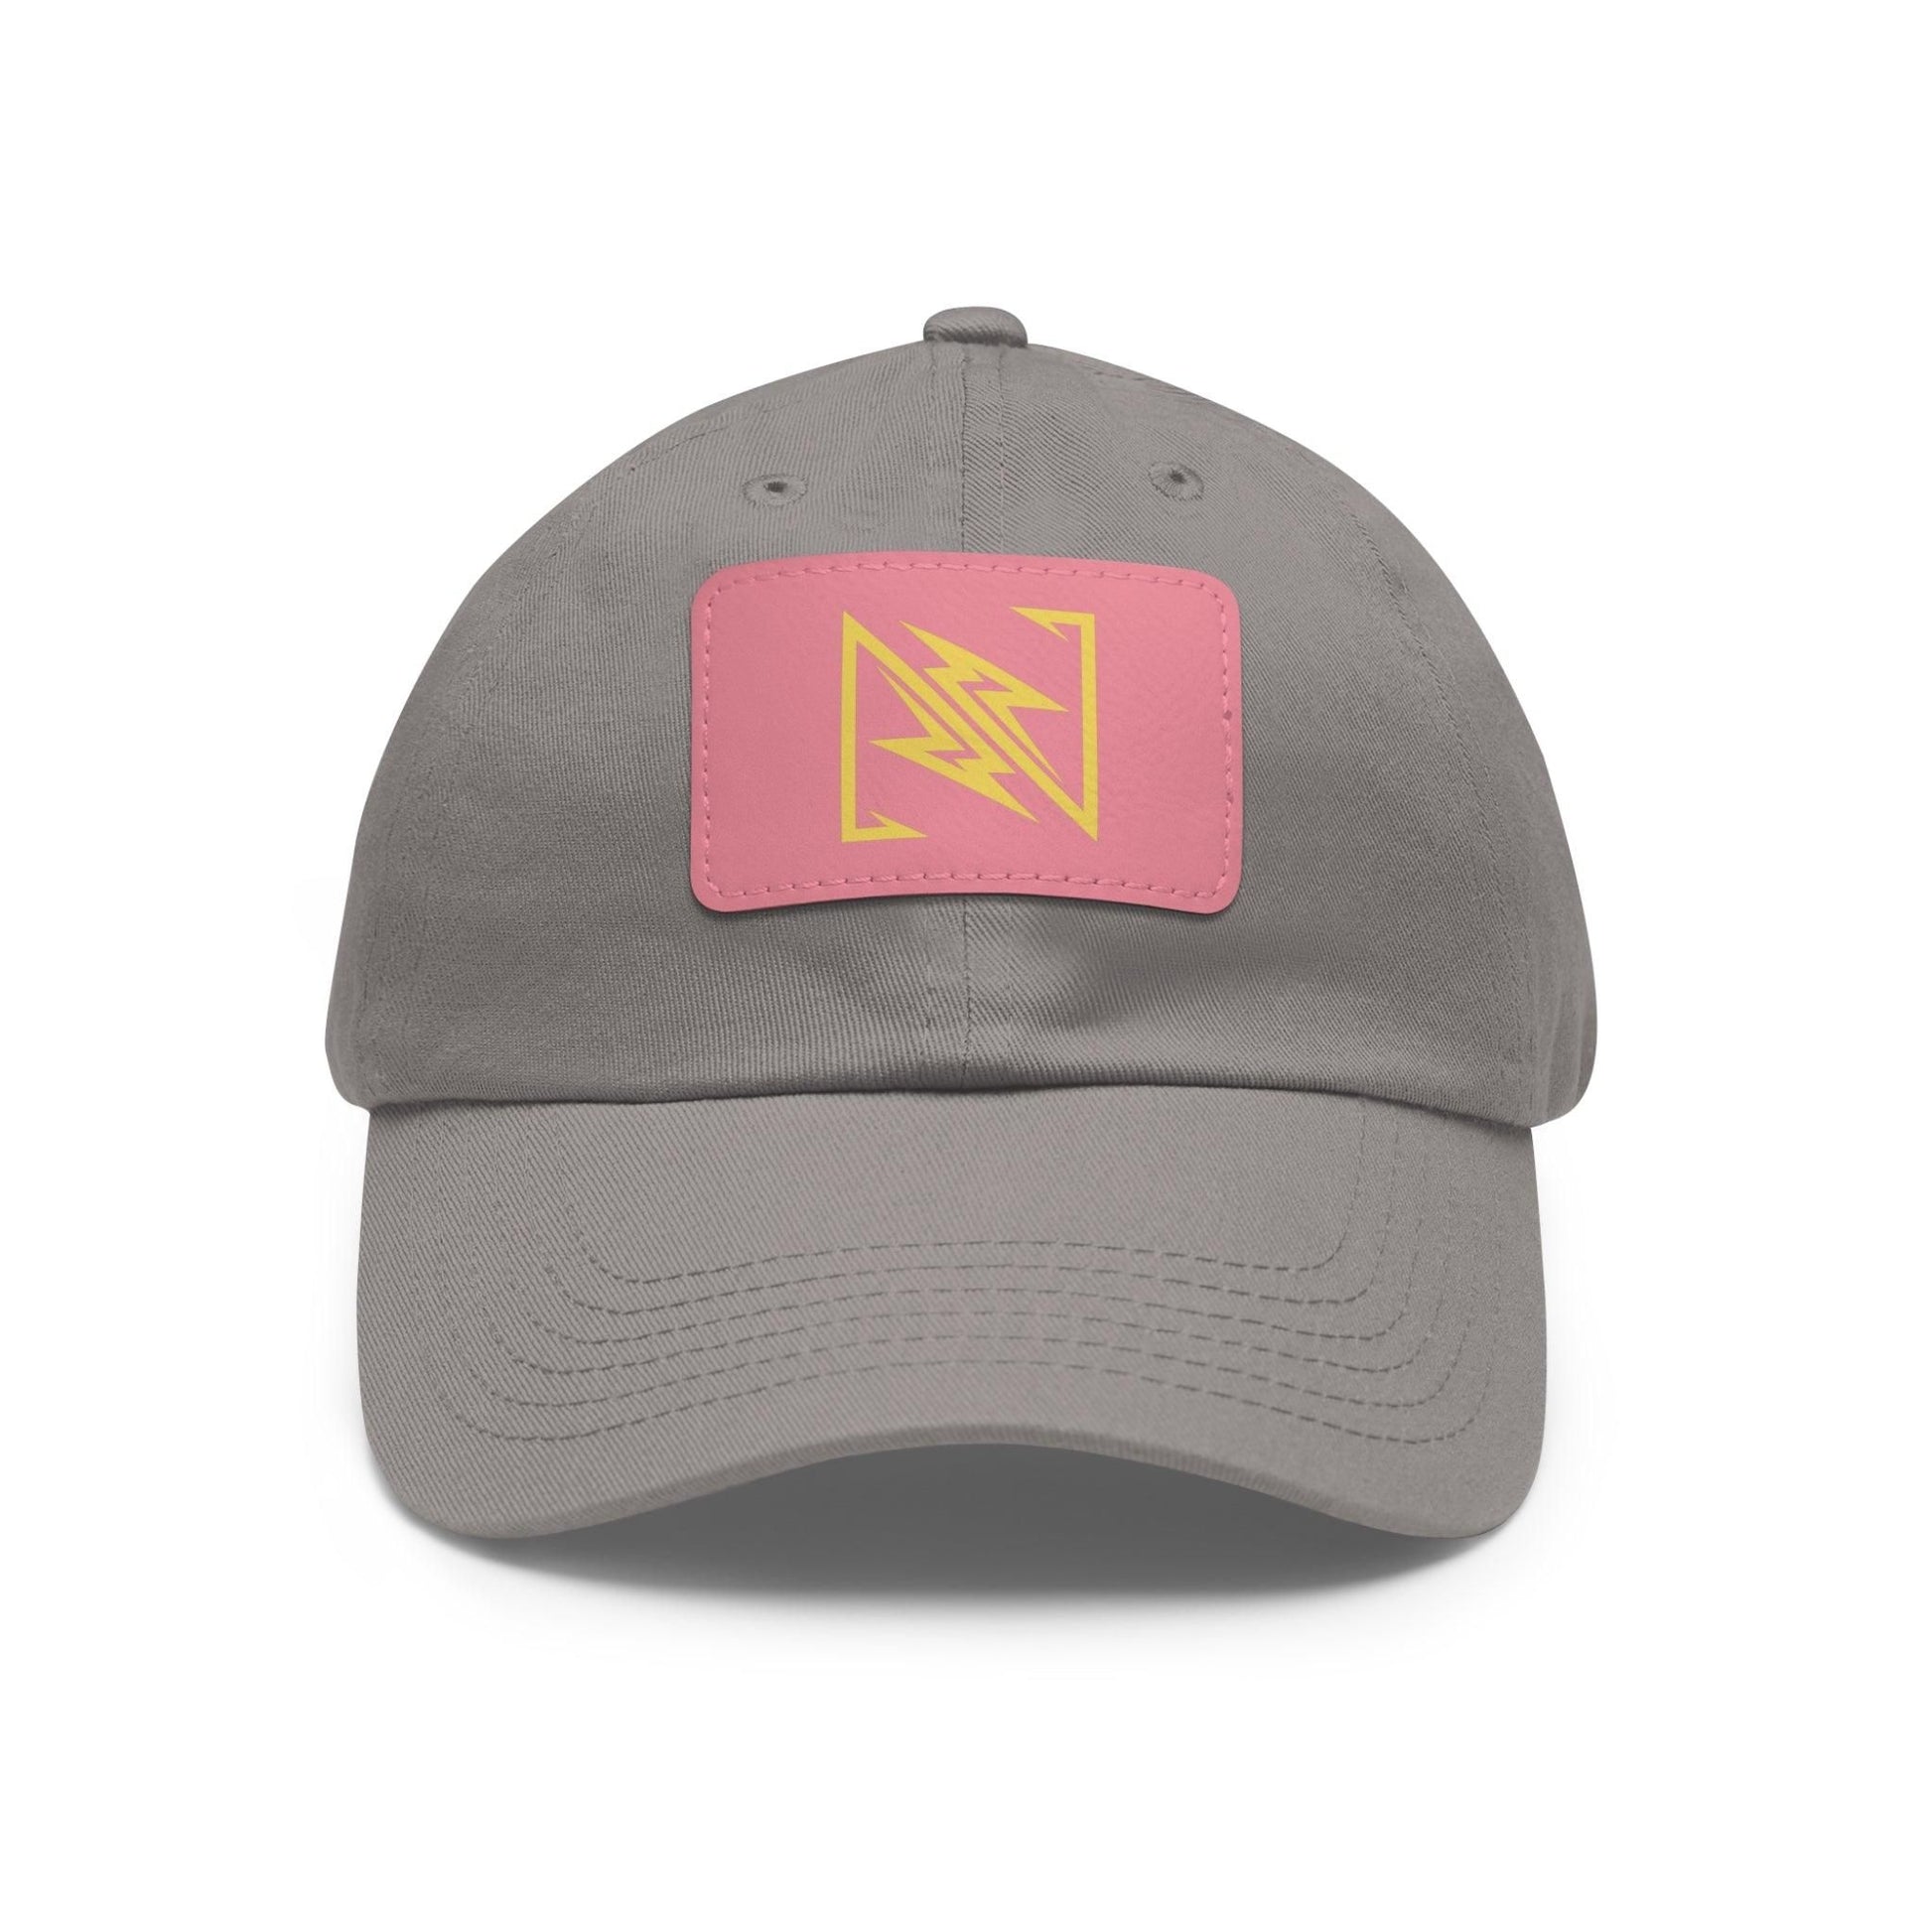 NX Vogue Premium Baseball Hat with Leather Patch Cap Grey / Pink patch Rectangle One size